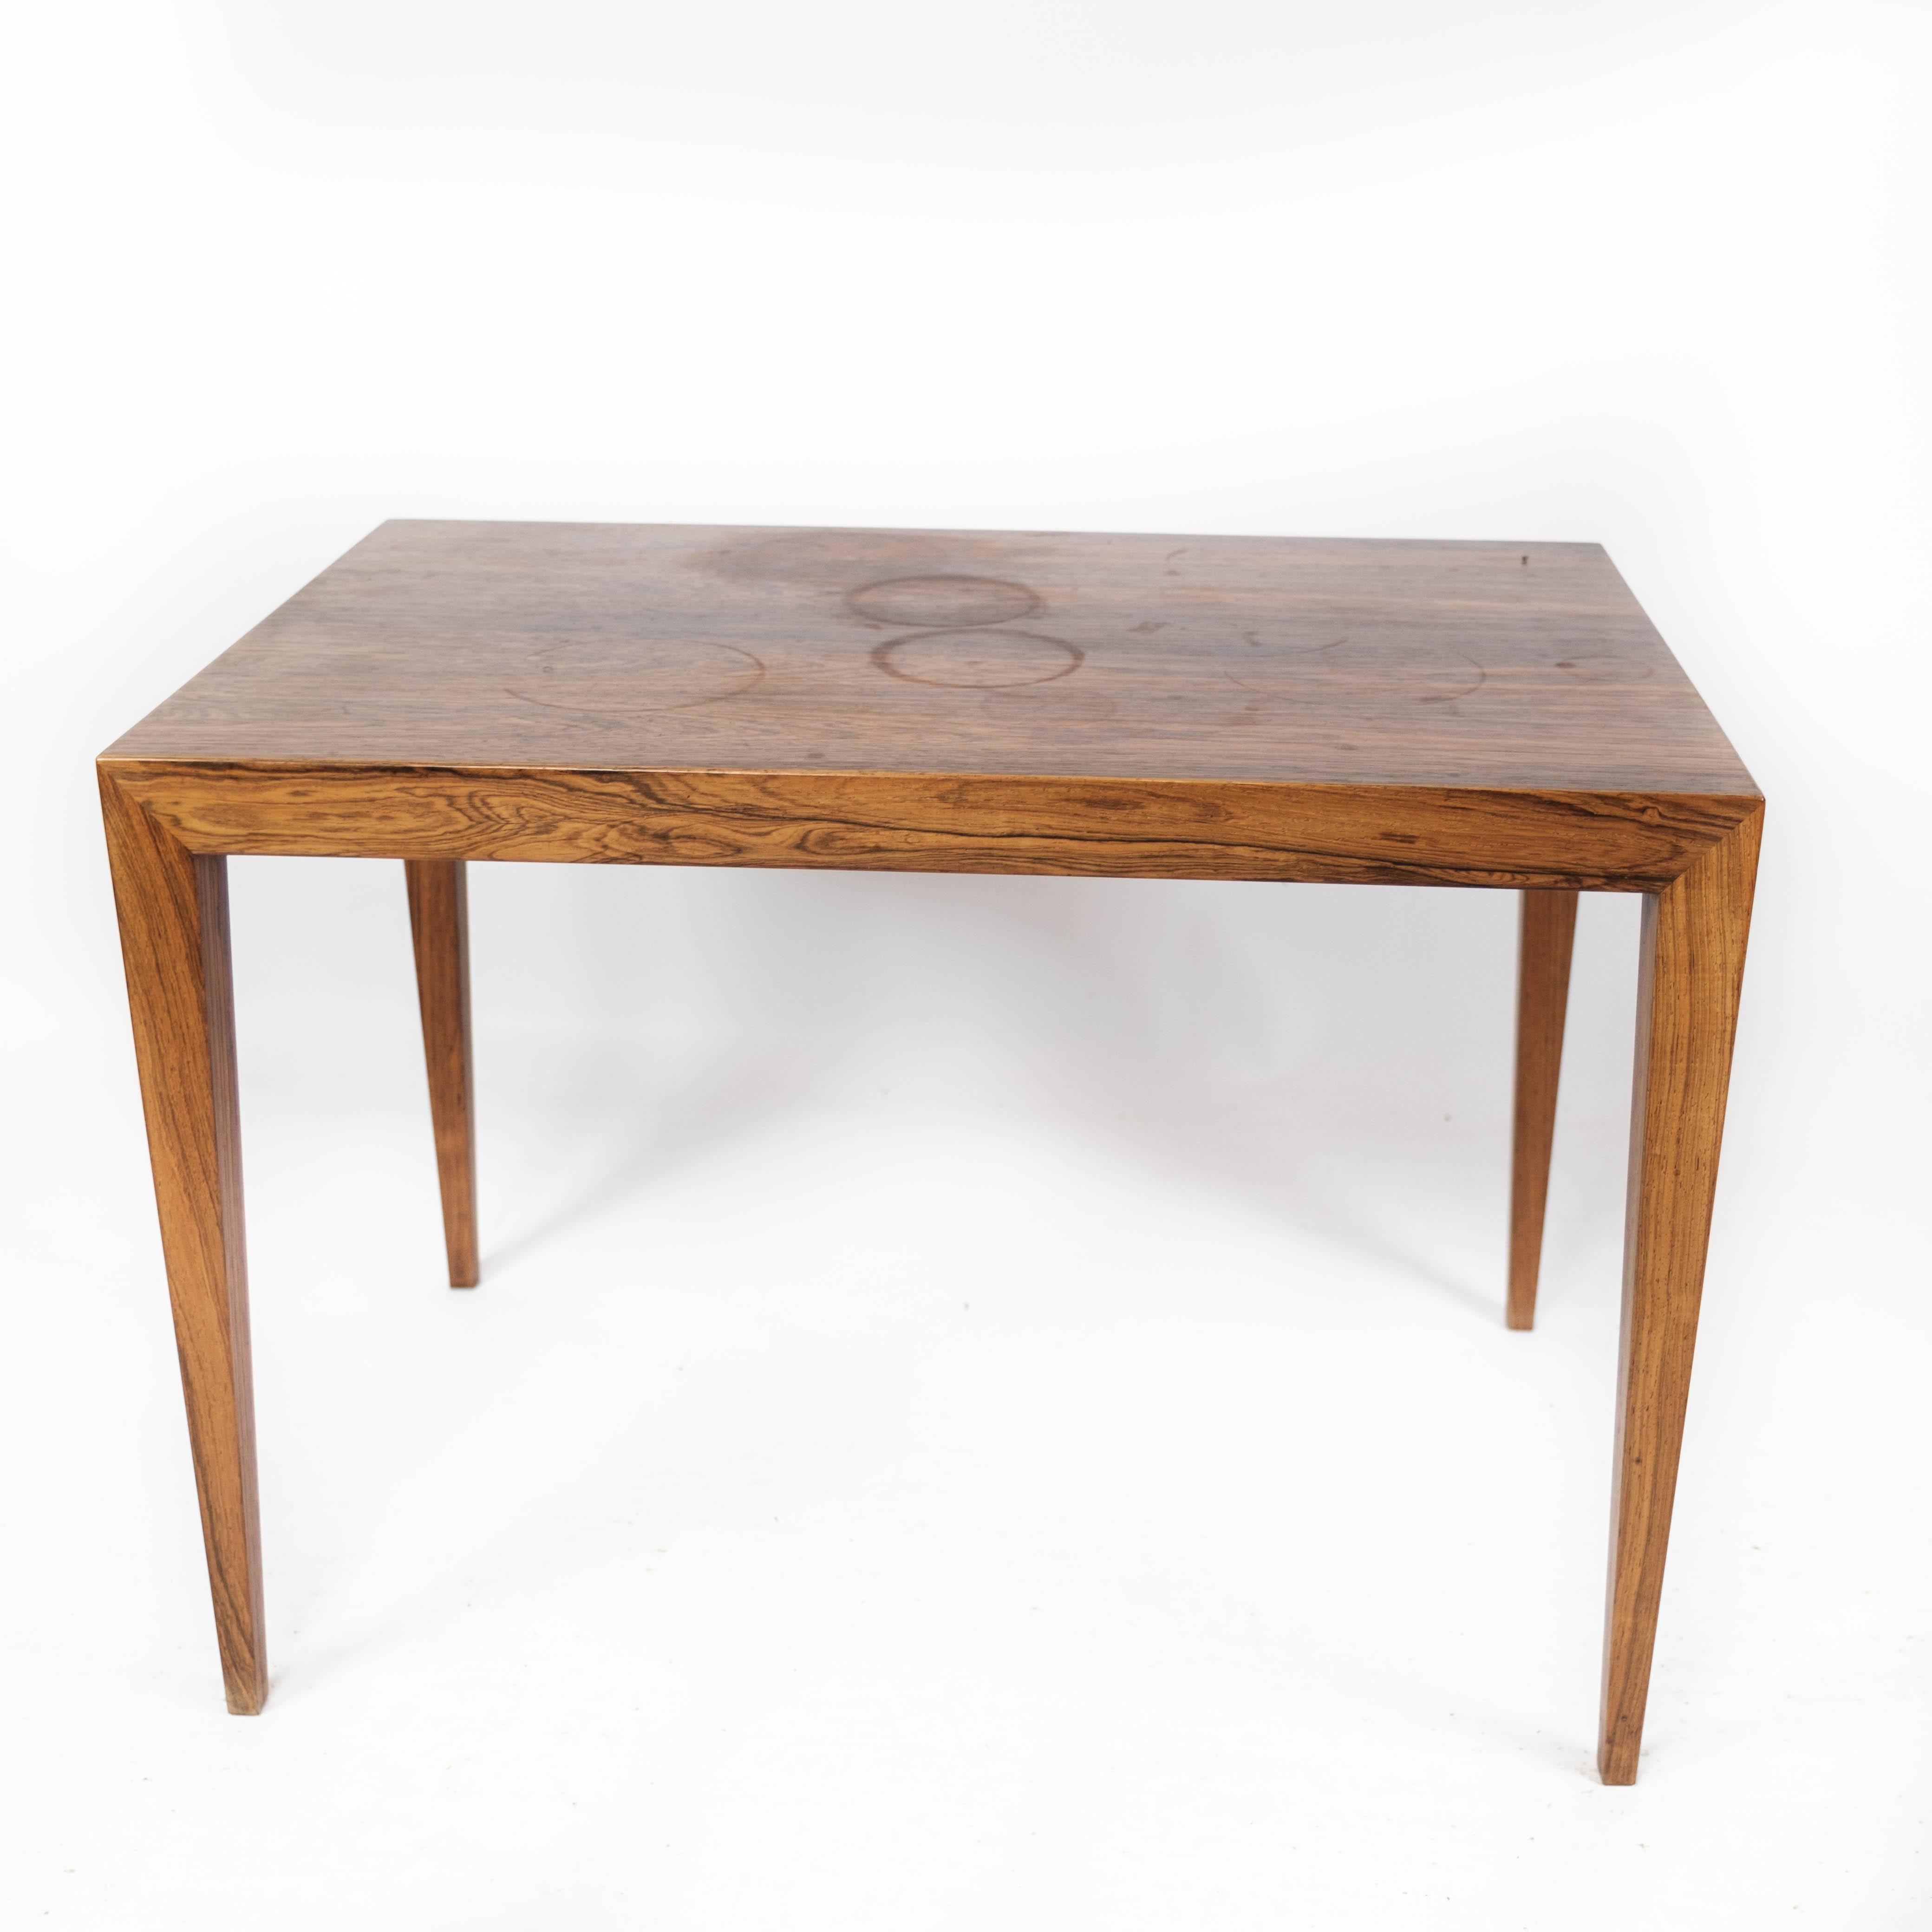 Side table in rosewood designed by Severin Hansen for Haslev Furniture in the 1960s. The table is in great vintage condition.